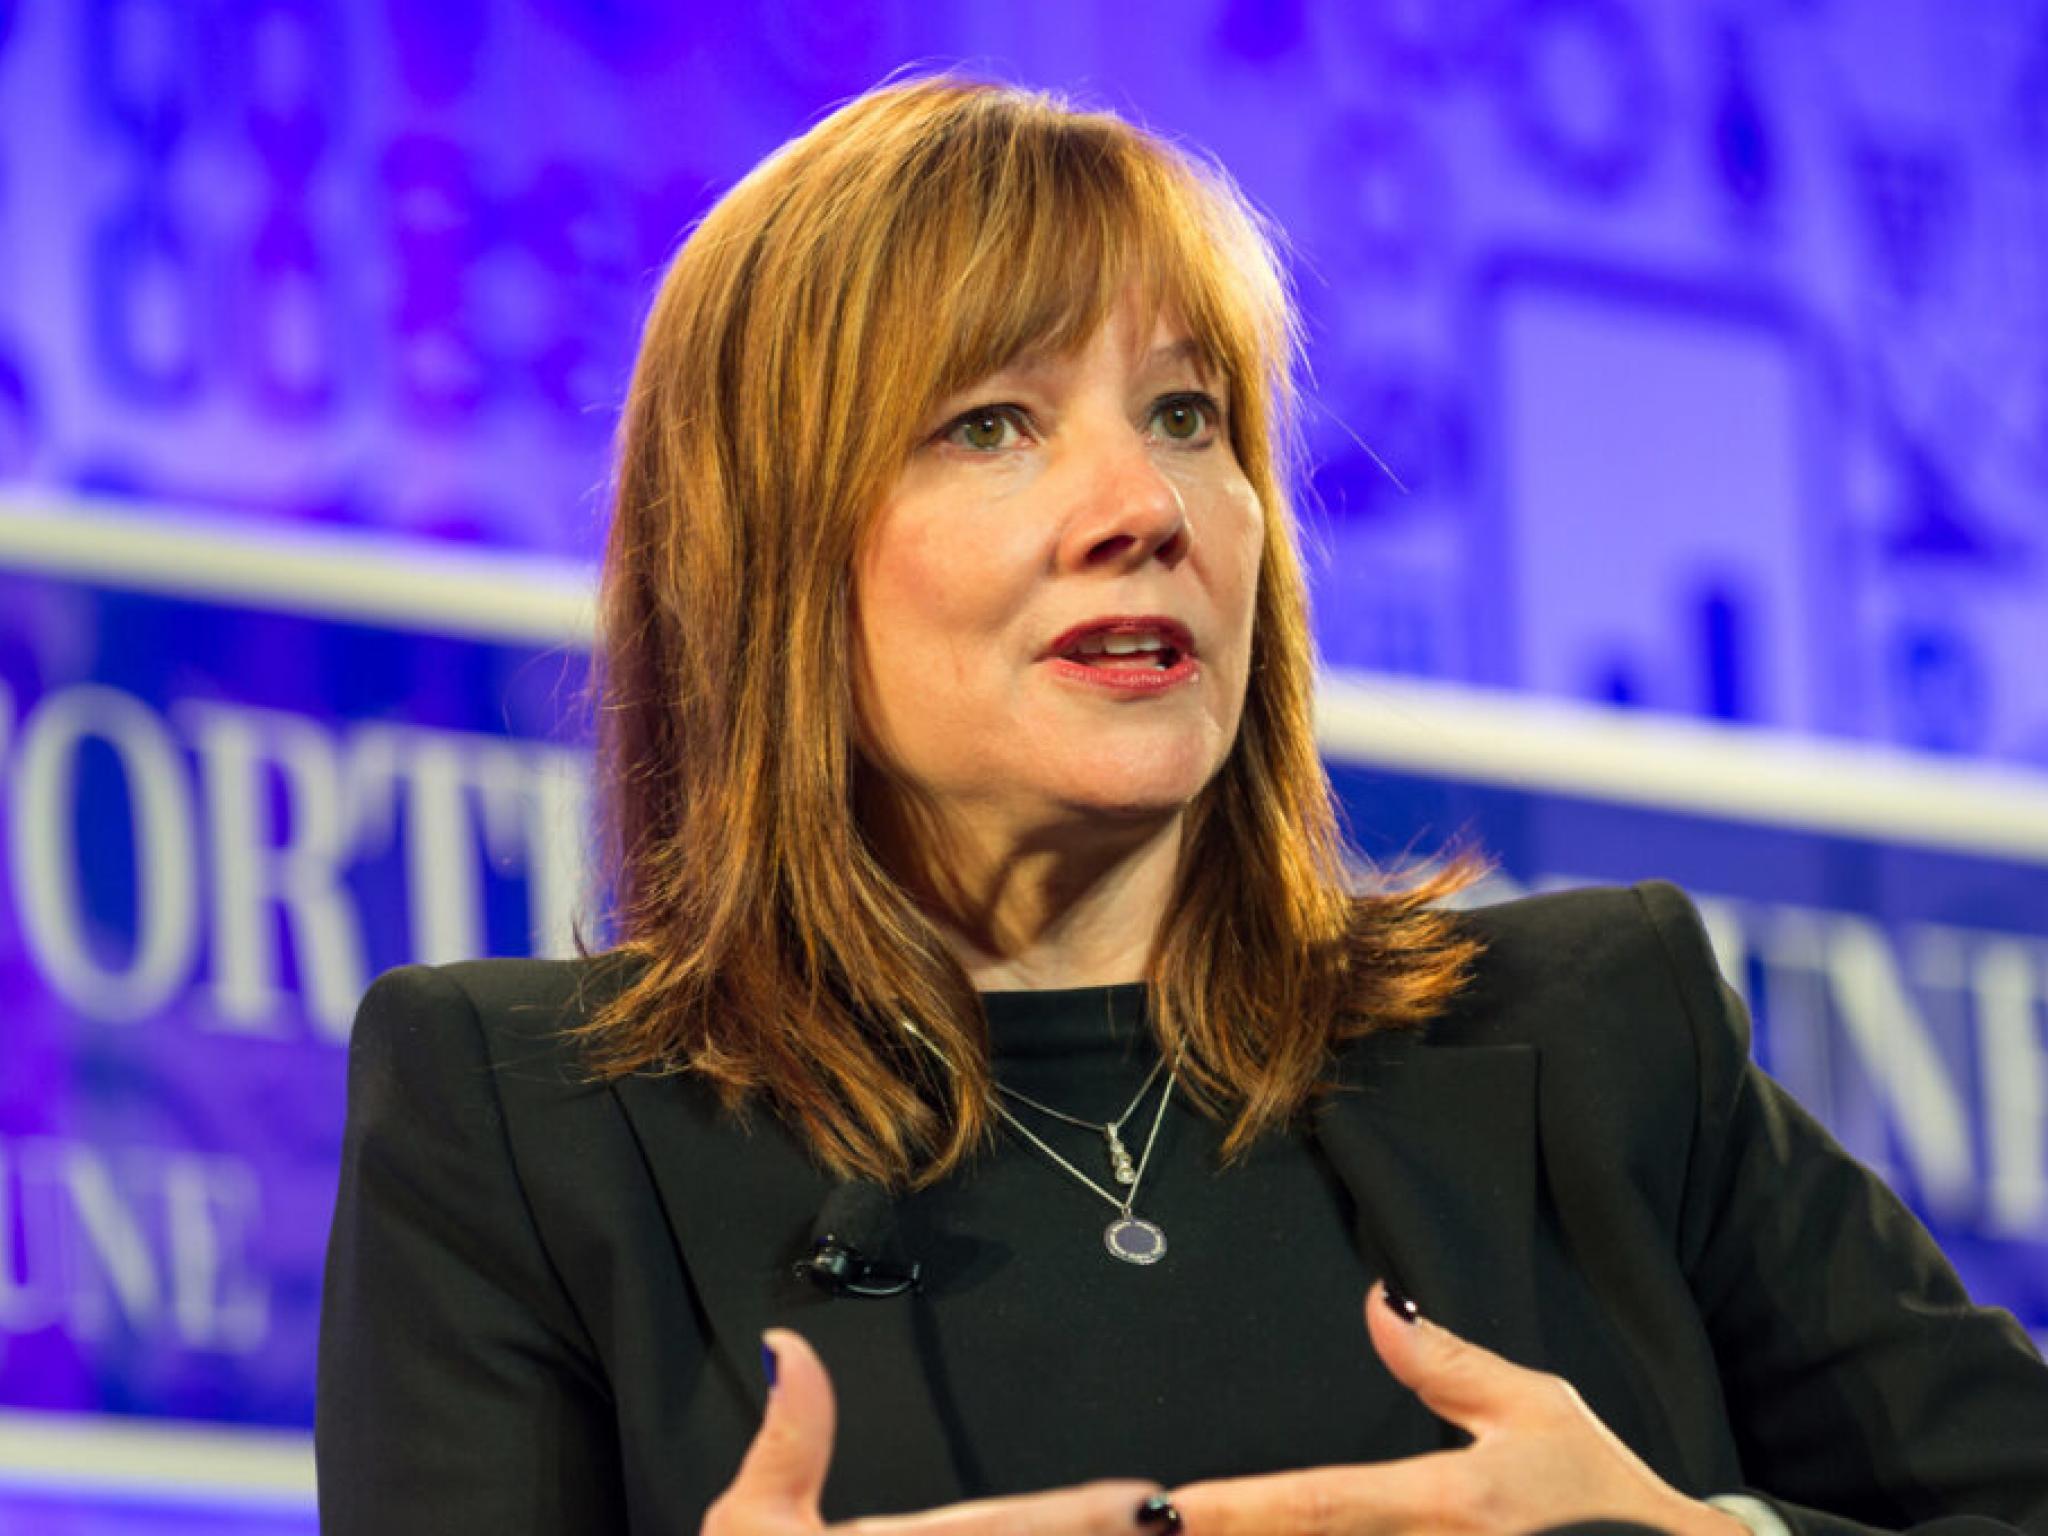  musk-is-an-innovator-but-gm-must-think-through-stances-based-on-company-values-mary-barra 